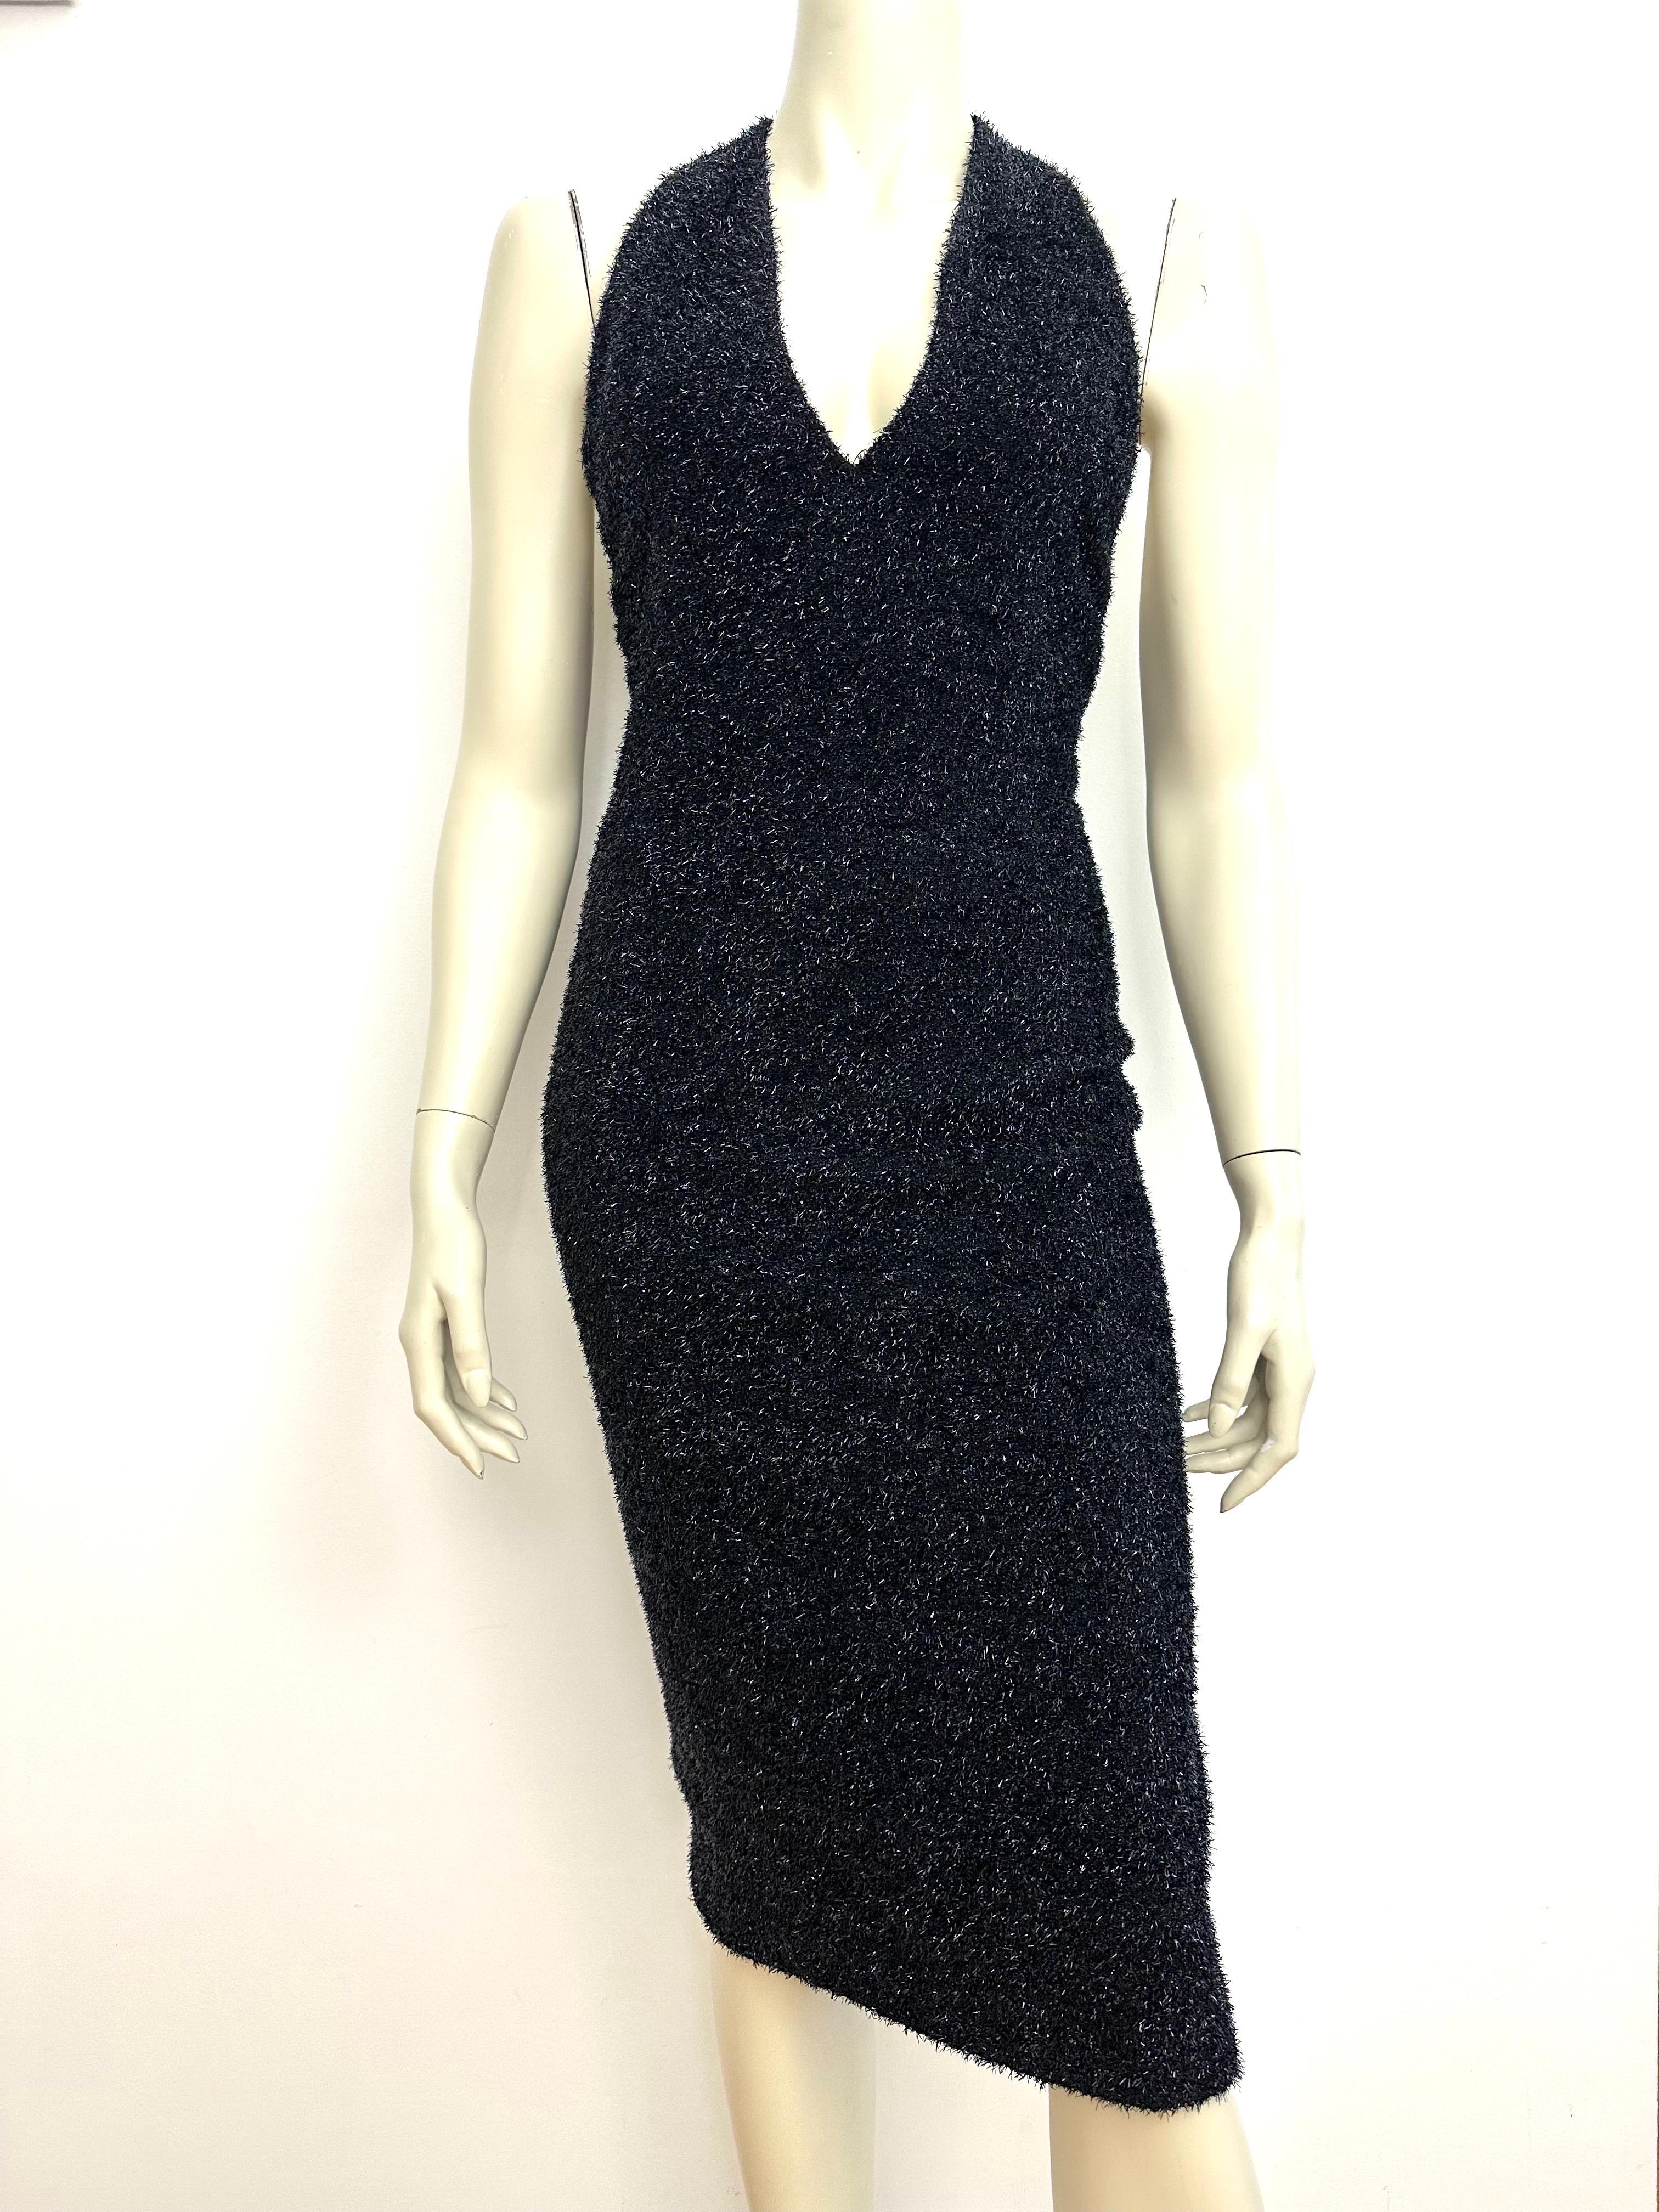 Elegant vintage Céline evening dress, sheath, halter and plunging V-neckline.
Wool and nylon blend, black with dark blue highlights.
Secret back zipper
Two long flat hooks close the dress at the neck.
Fully lined.
Size 38 (which runs small)
please